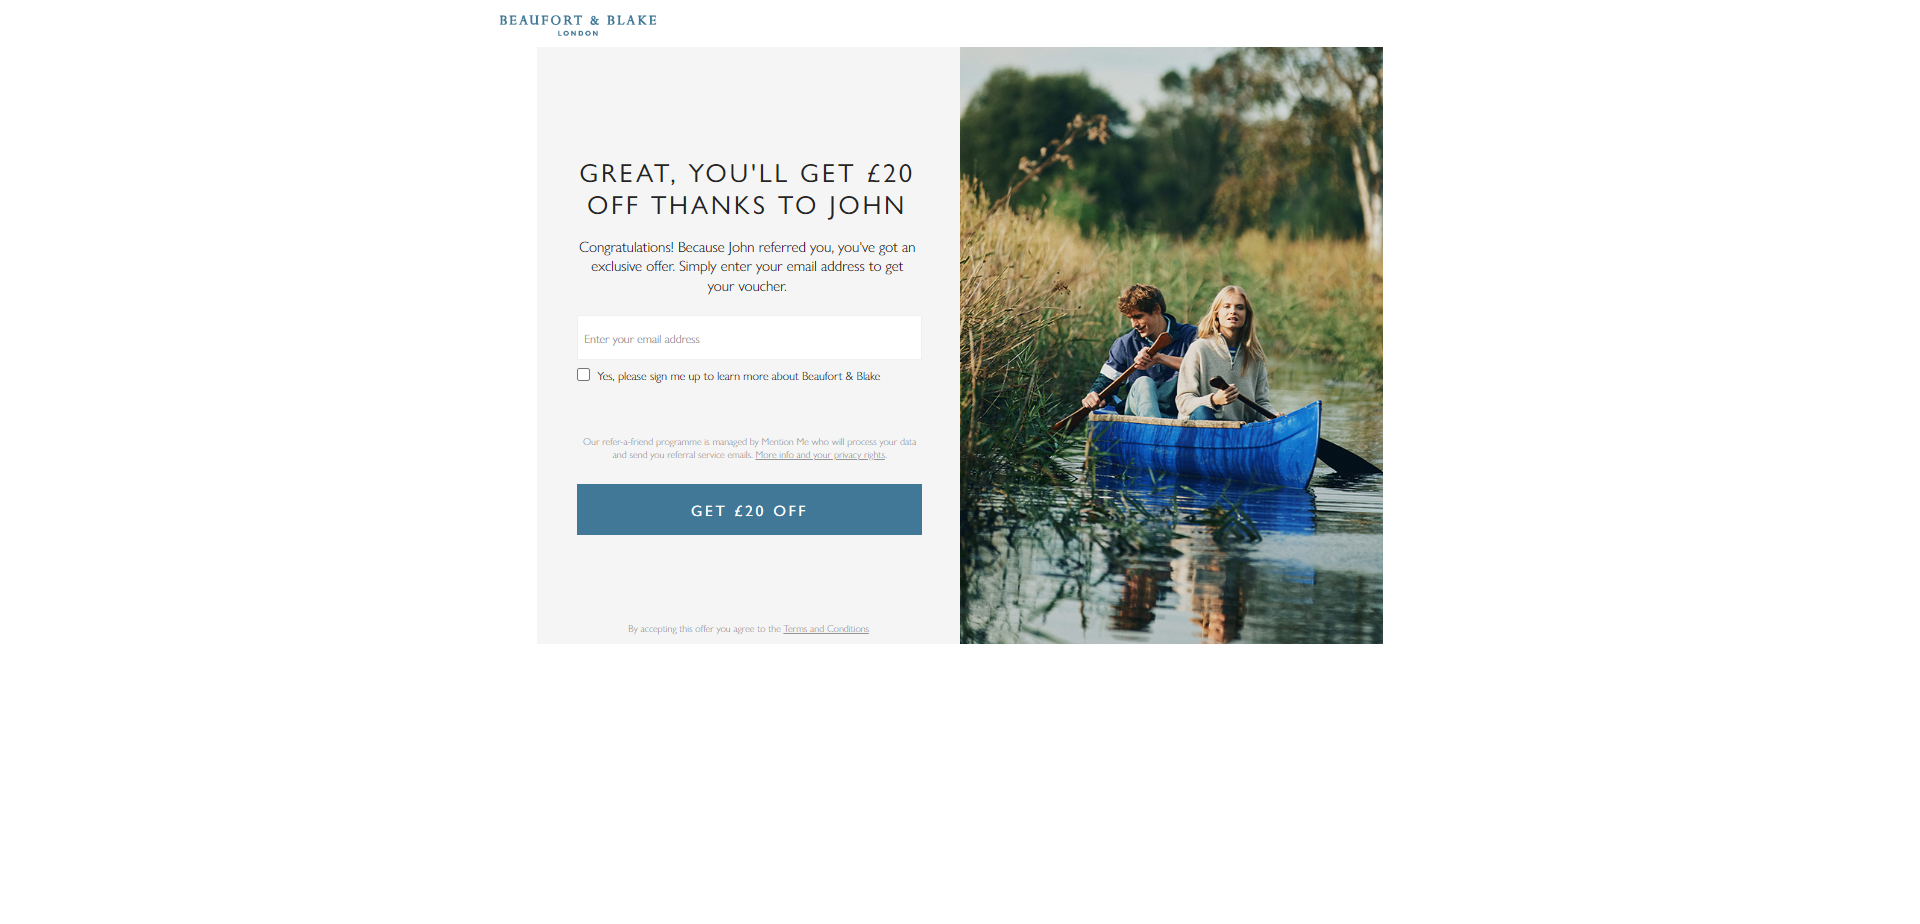 Referral Landing Page for Beaufort and Blake